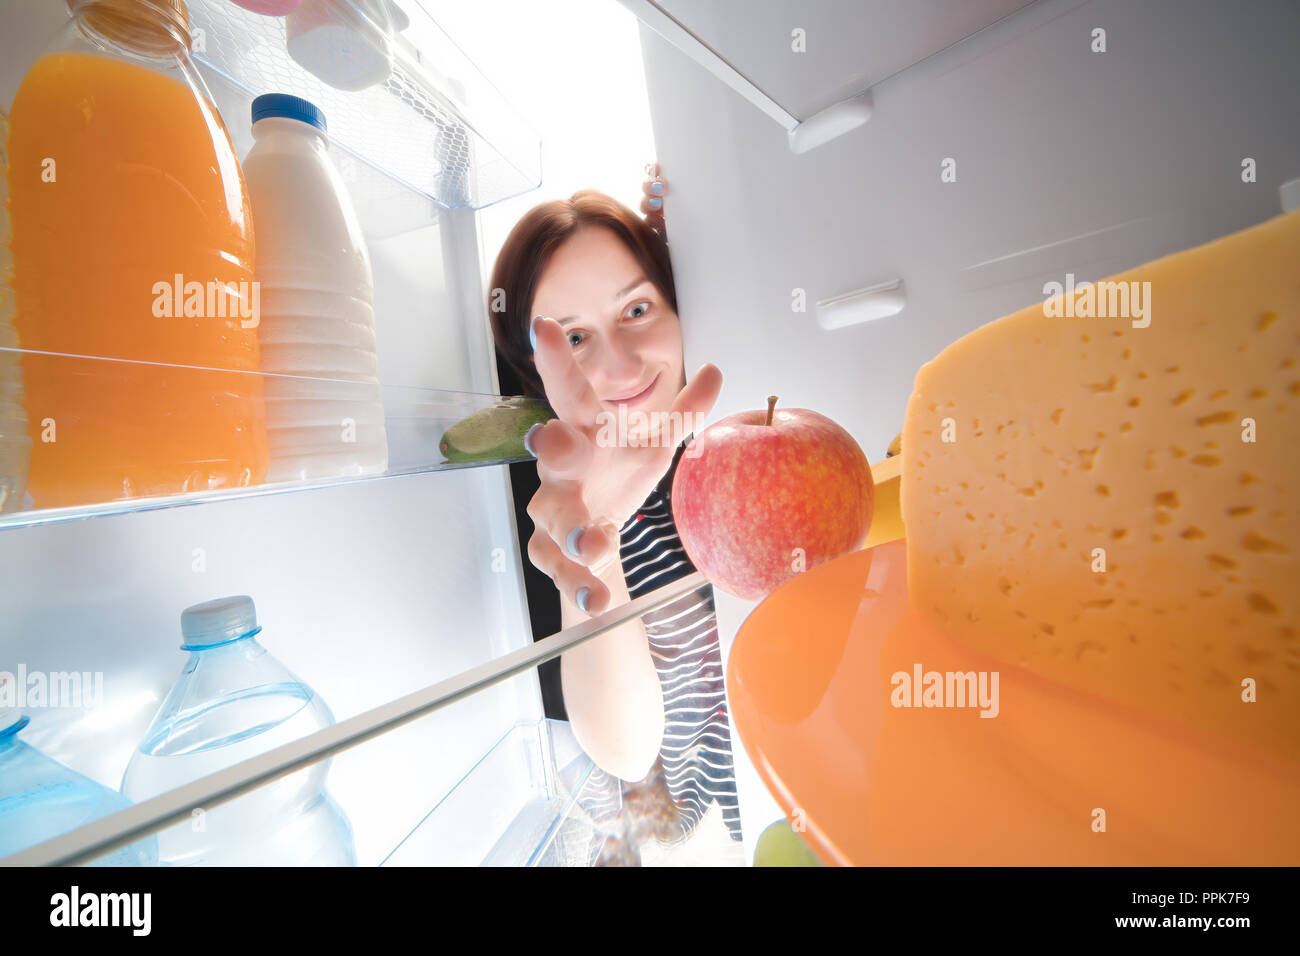 Funny happy girl taking apple from the fridge. View from inside Stock Photo